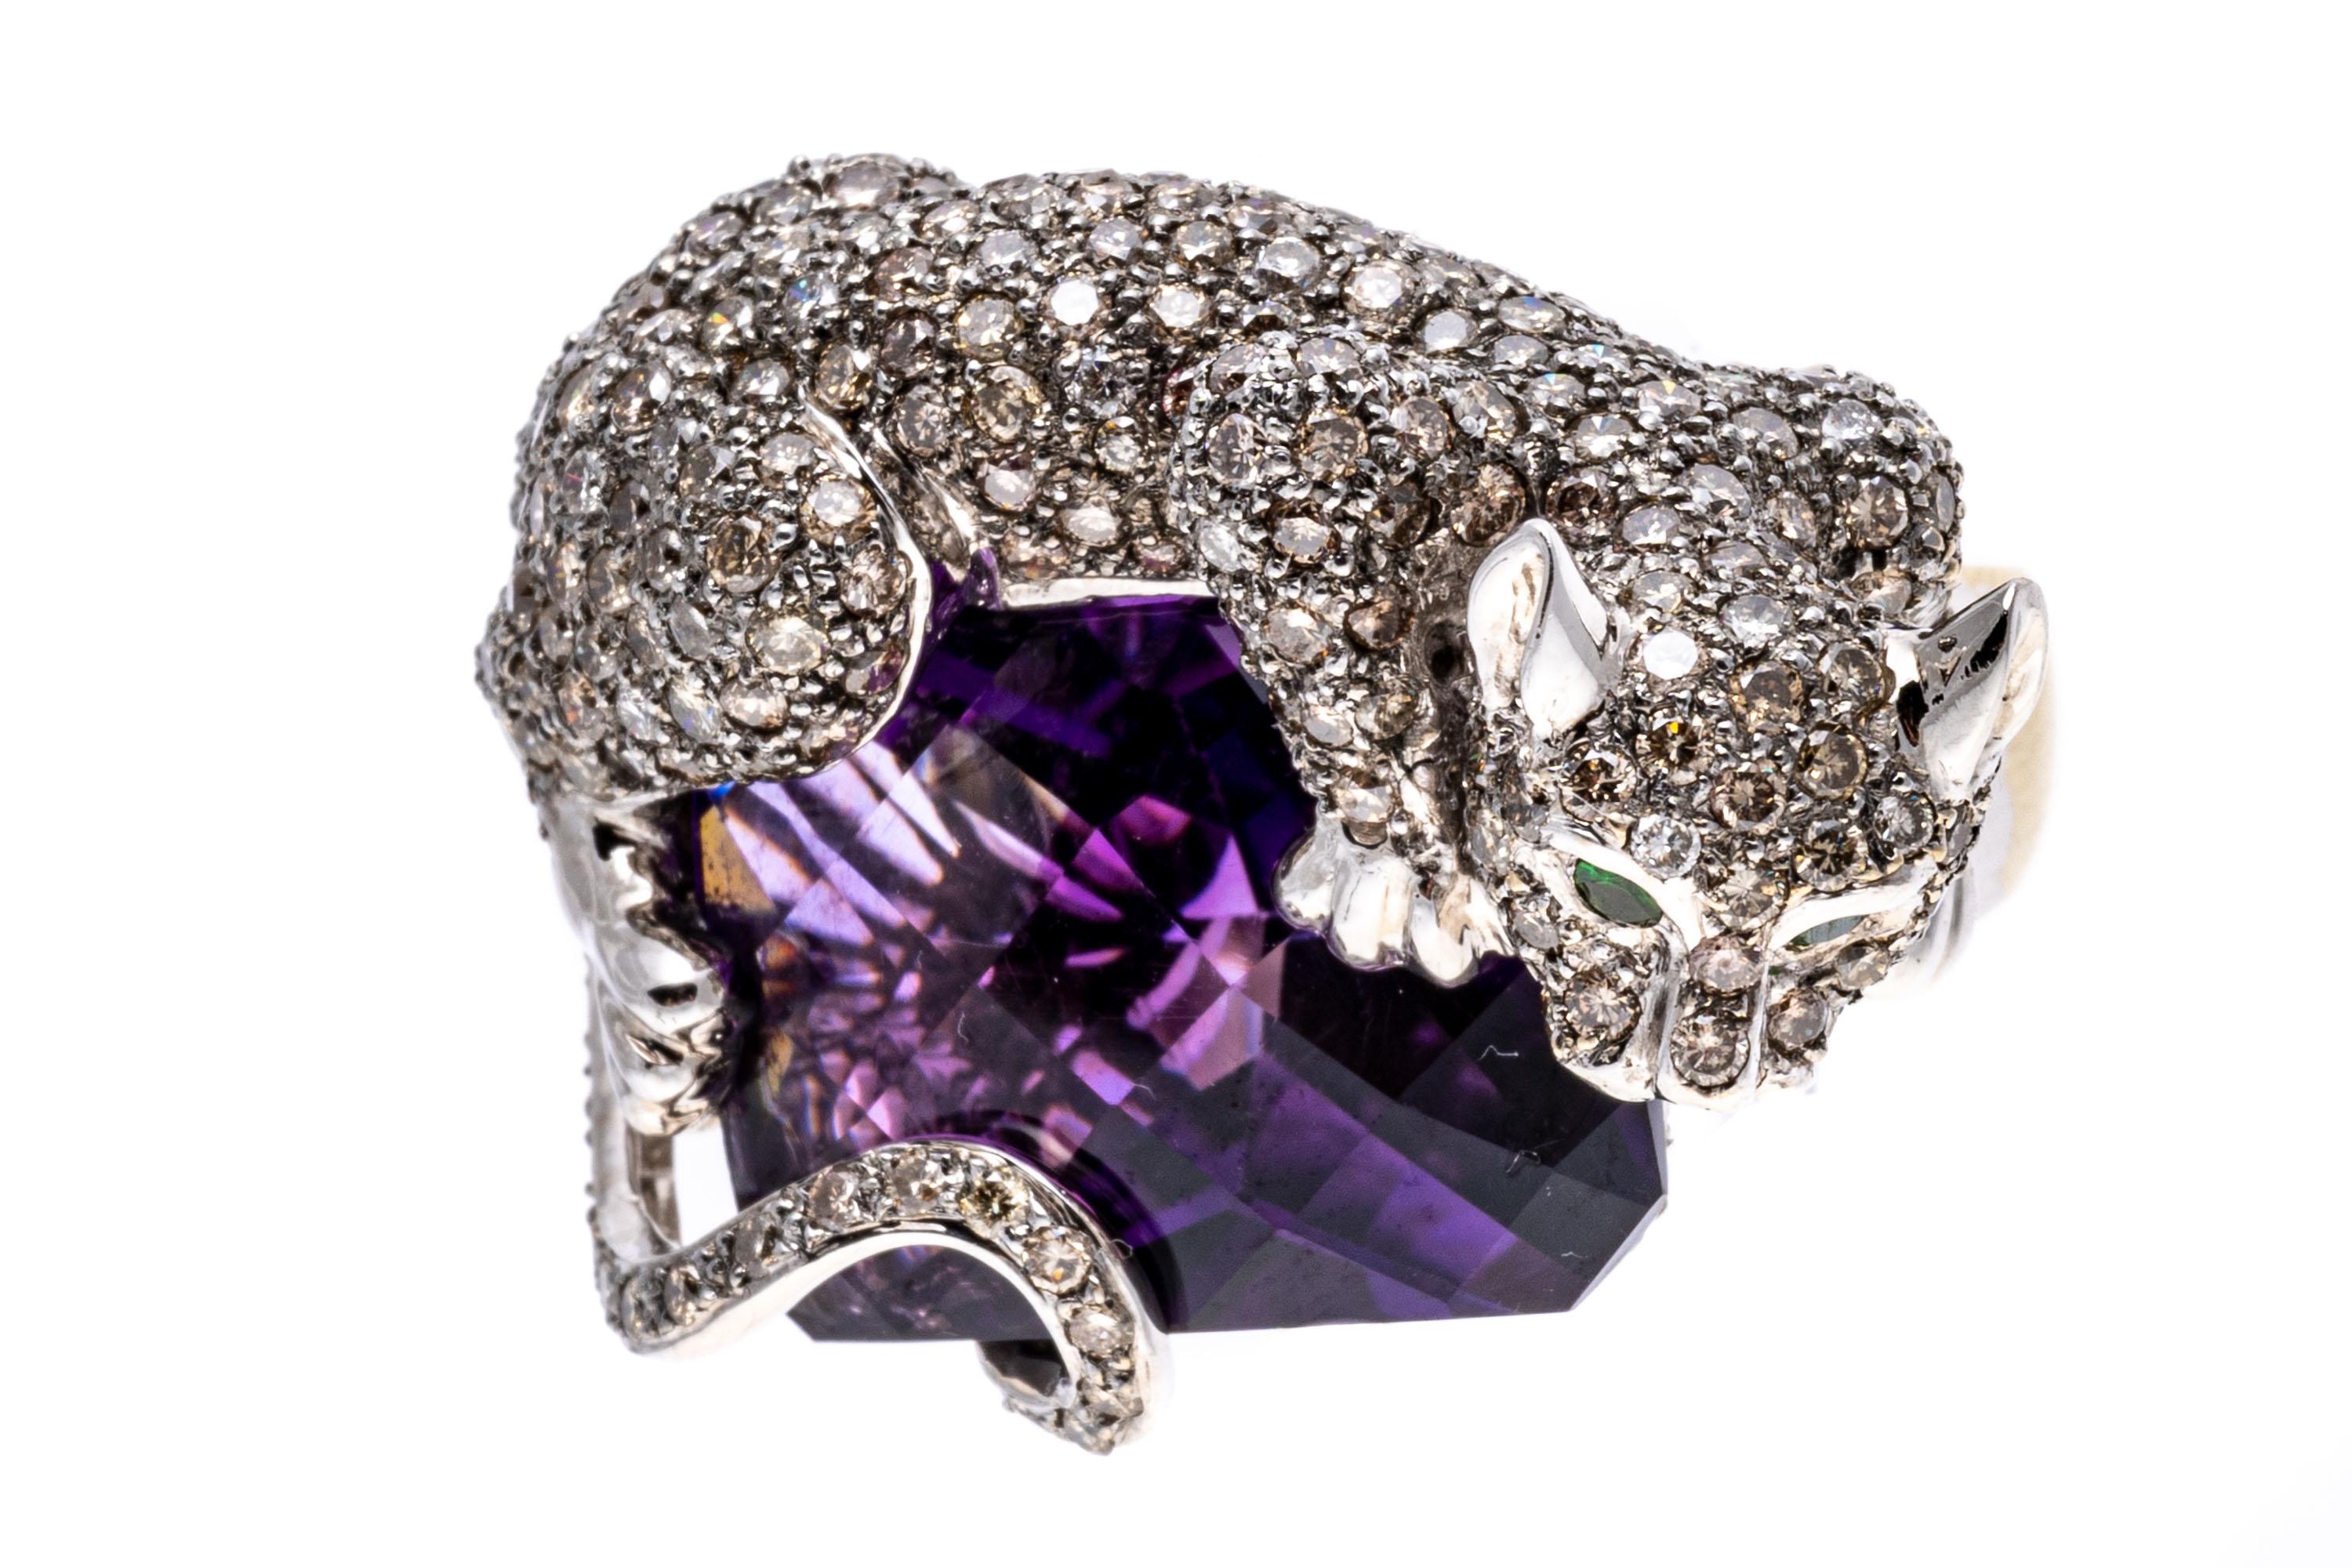 Round Cut 14k Gold Pave Diamond Panther Ring Atop An Amethyst, App. 13.64 CTS